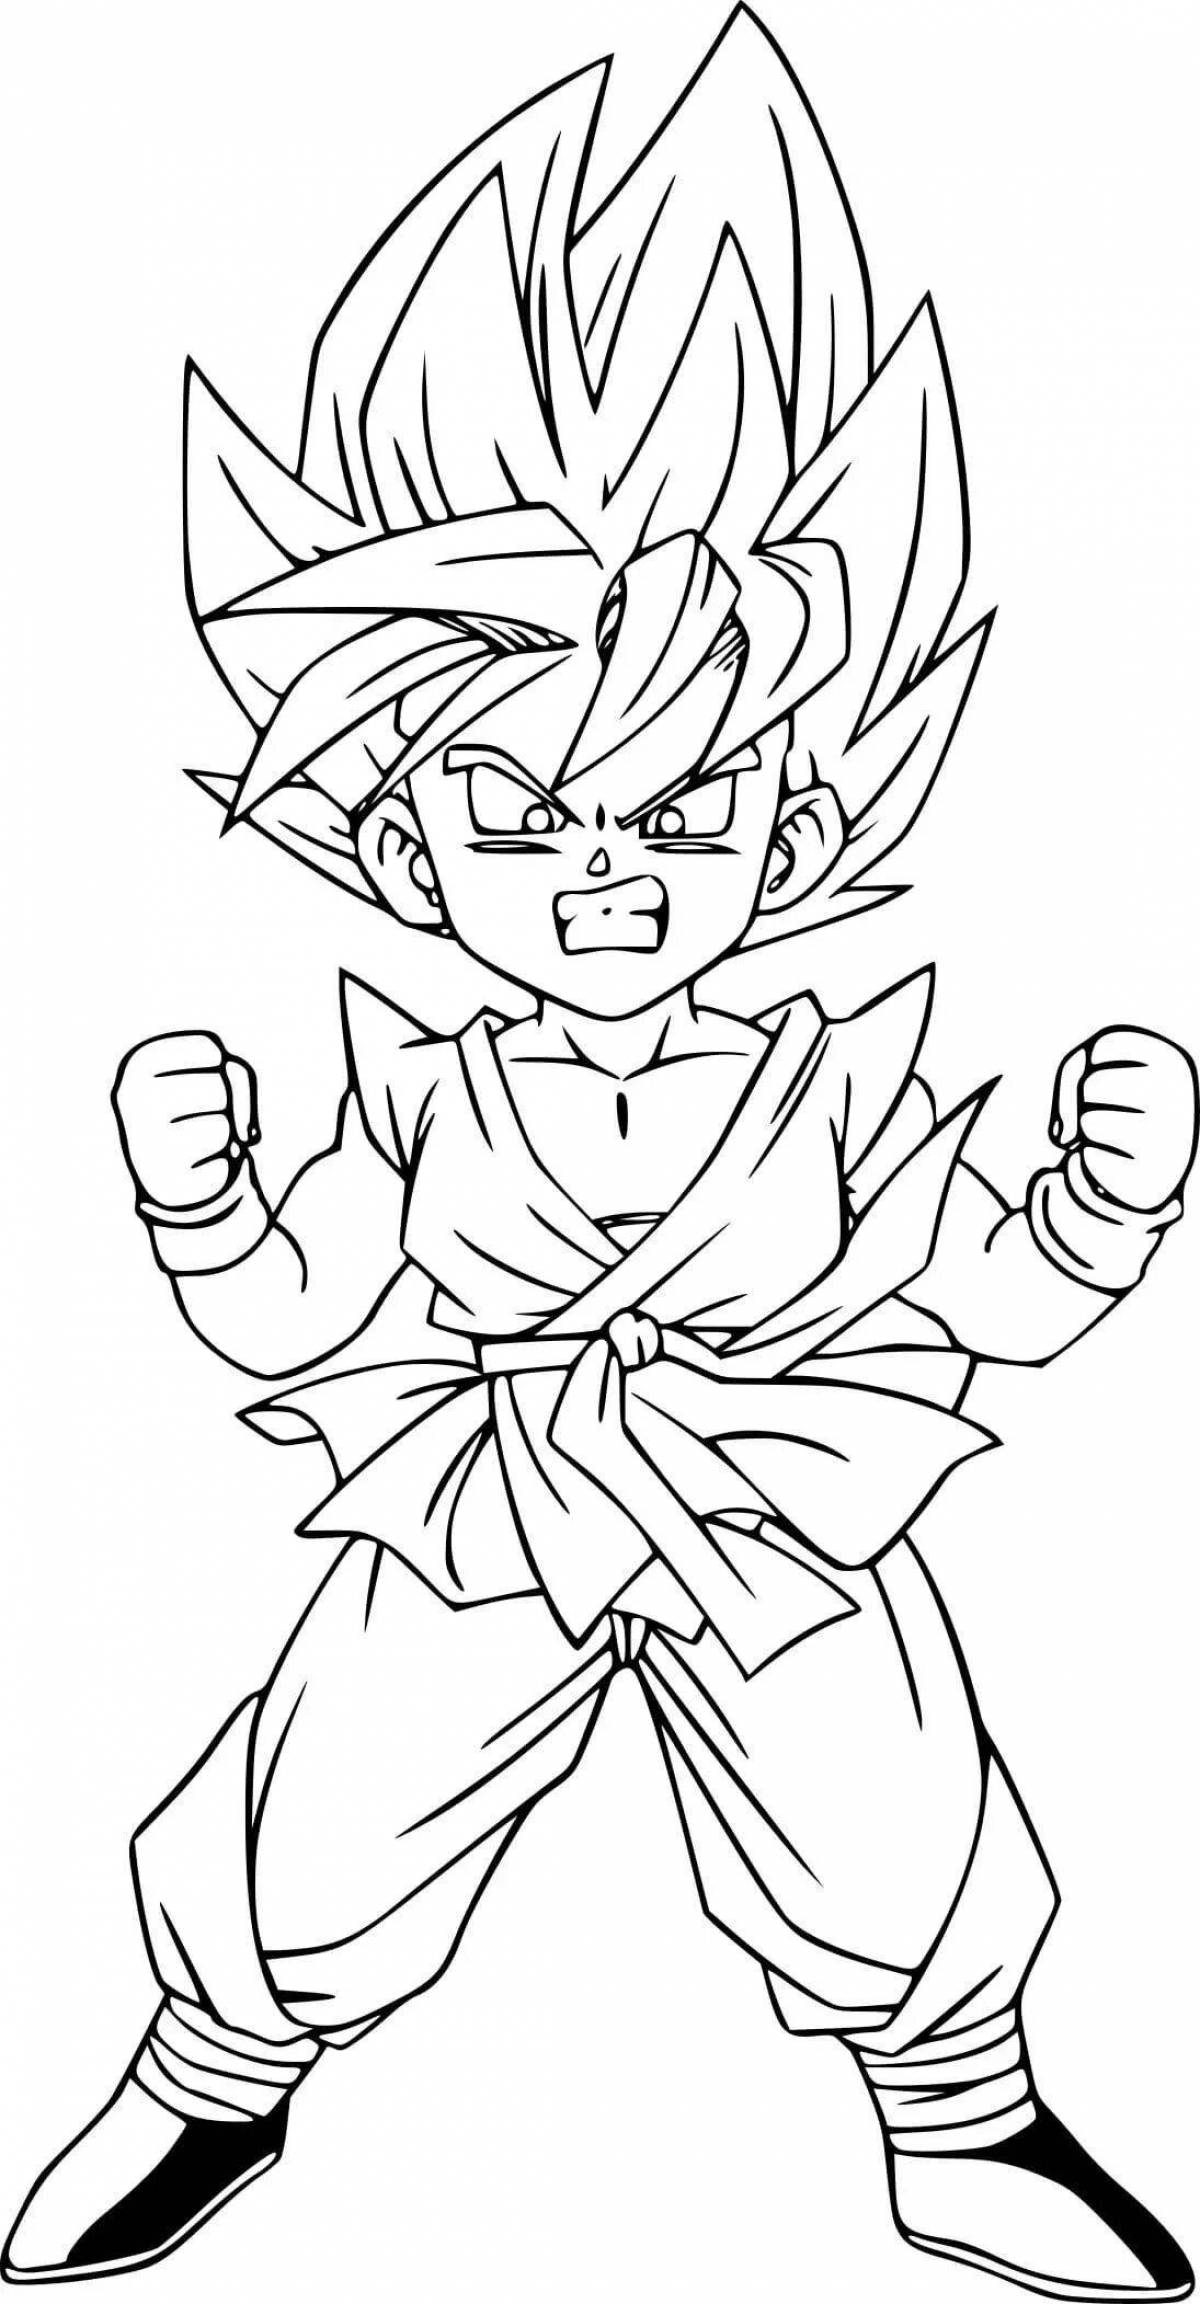 Exquisite dragon ball coloring book